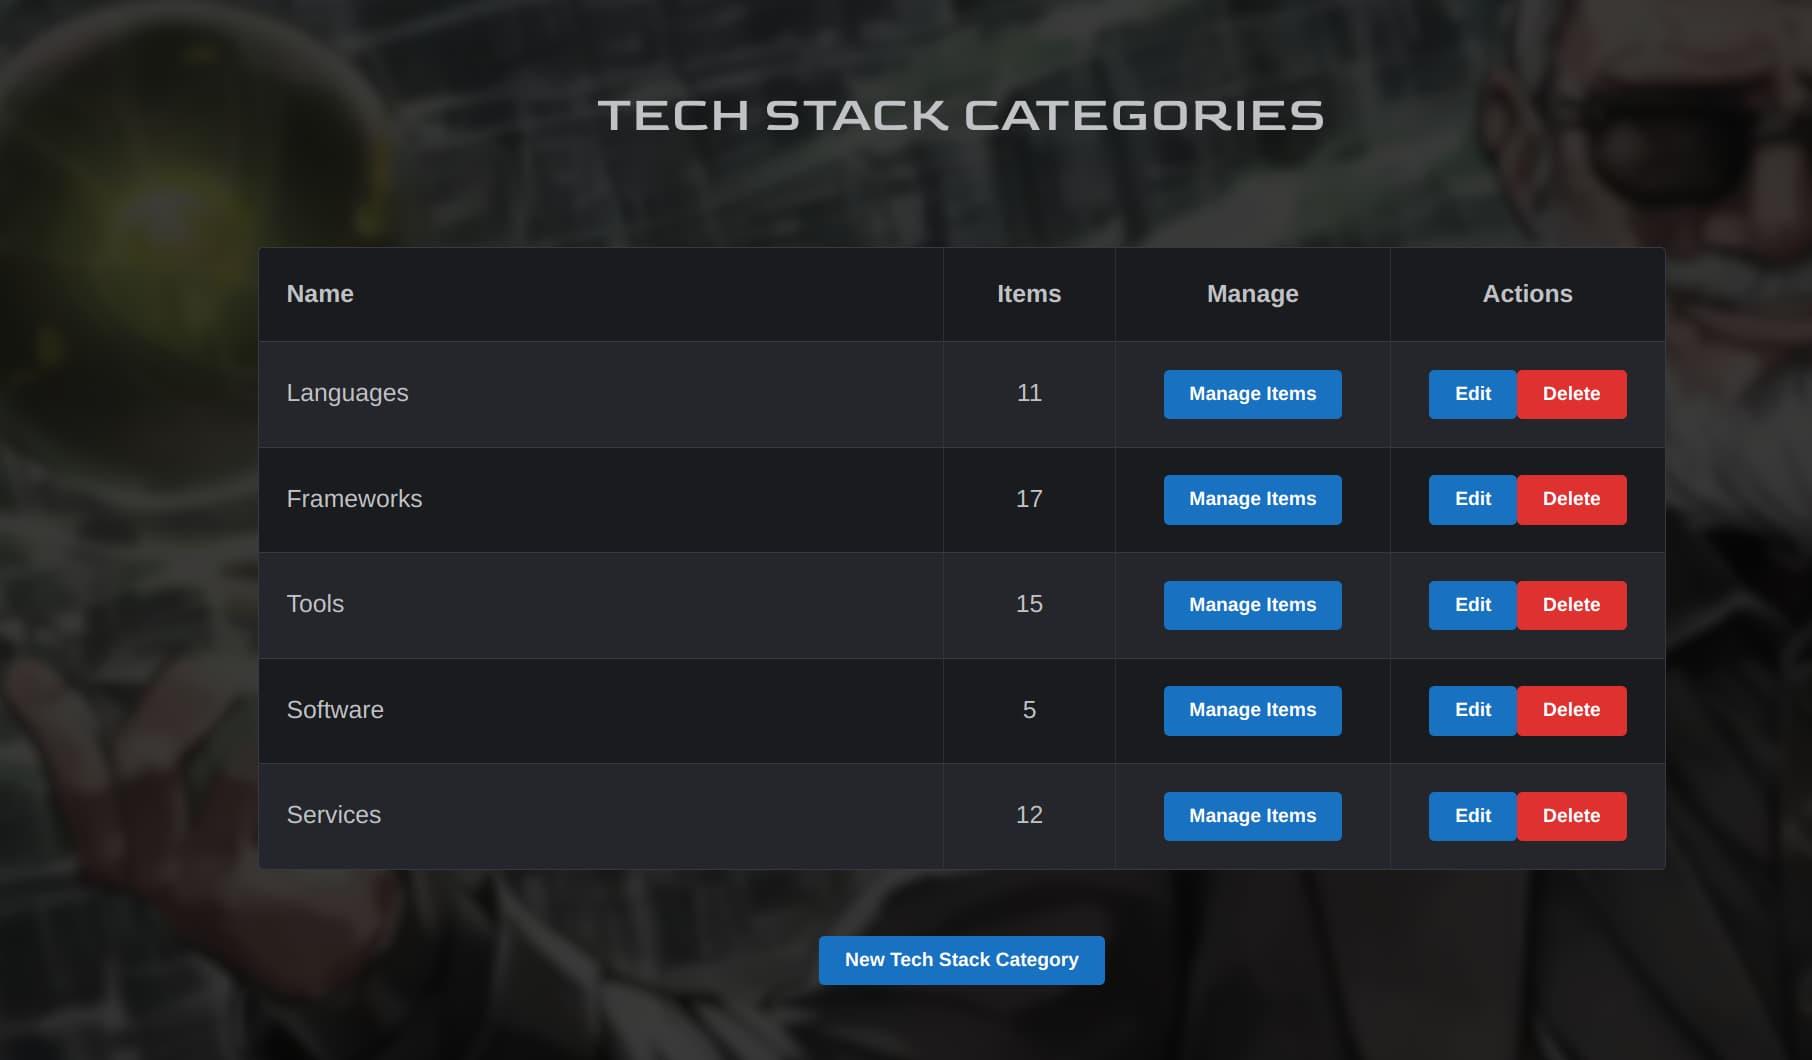 This page displays tech stack categories (languages, frameworks, tools, software, and services). The categories themselves can be edited here, but it is also possible to manage the items of each individual category